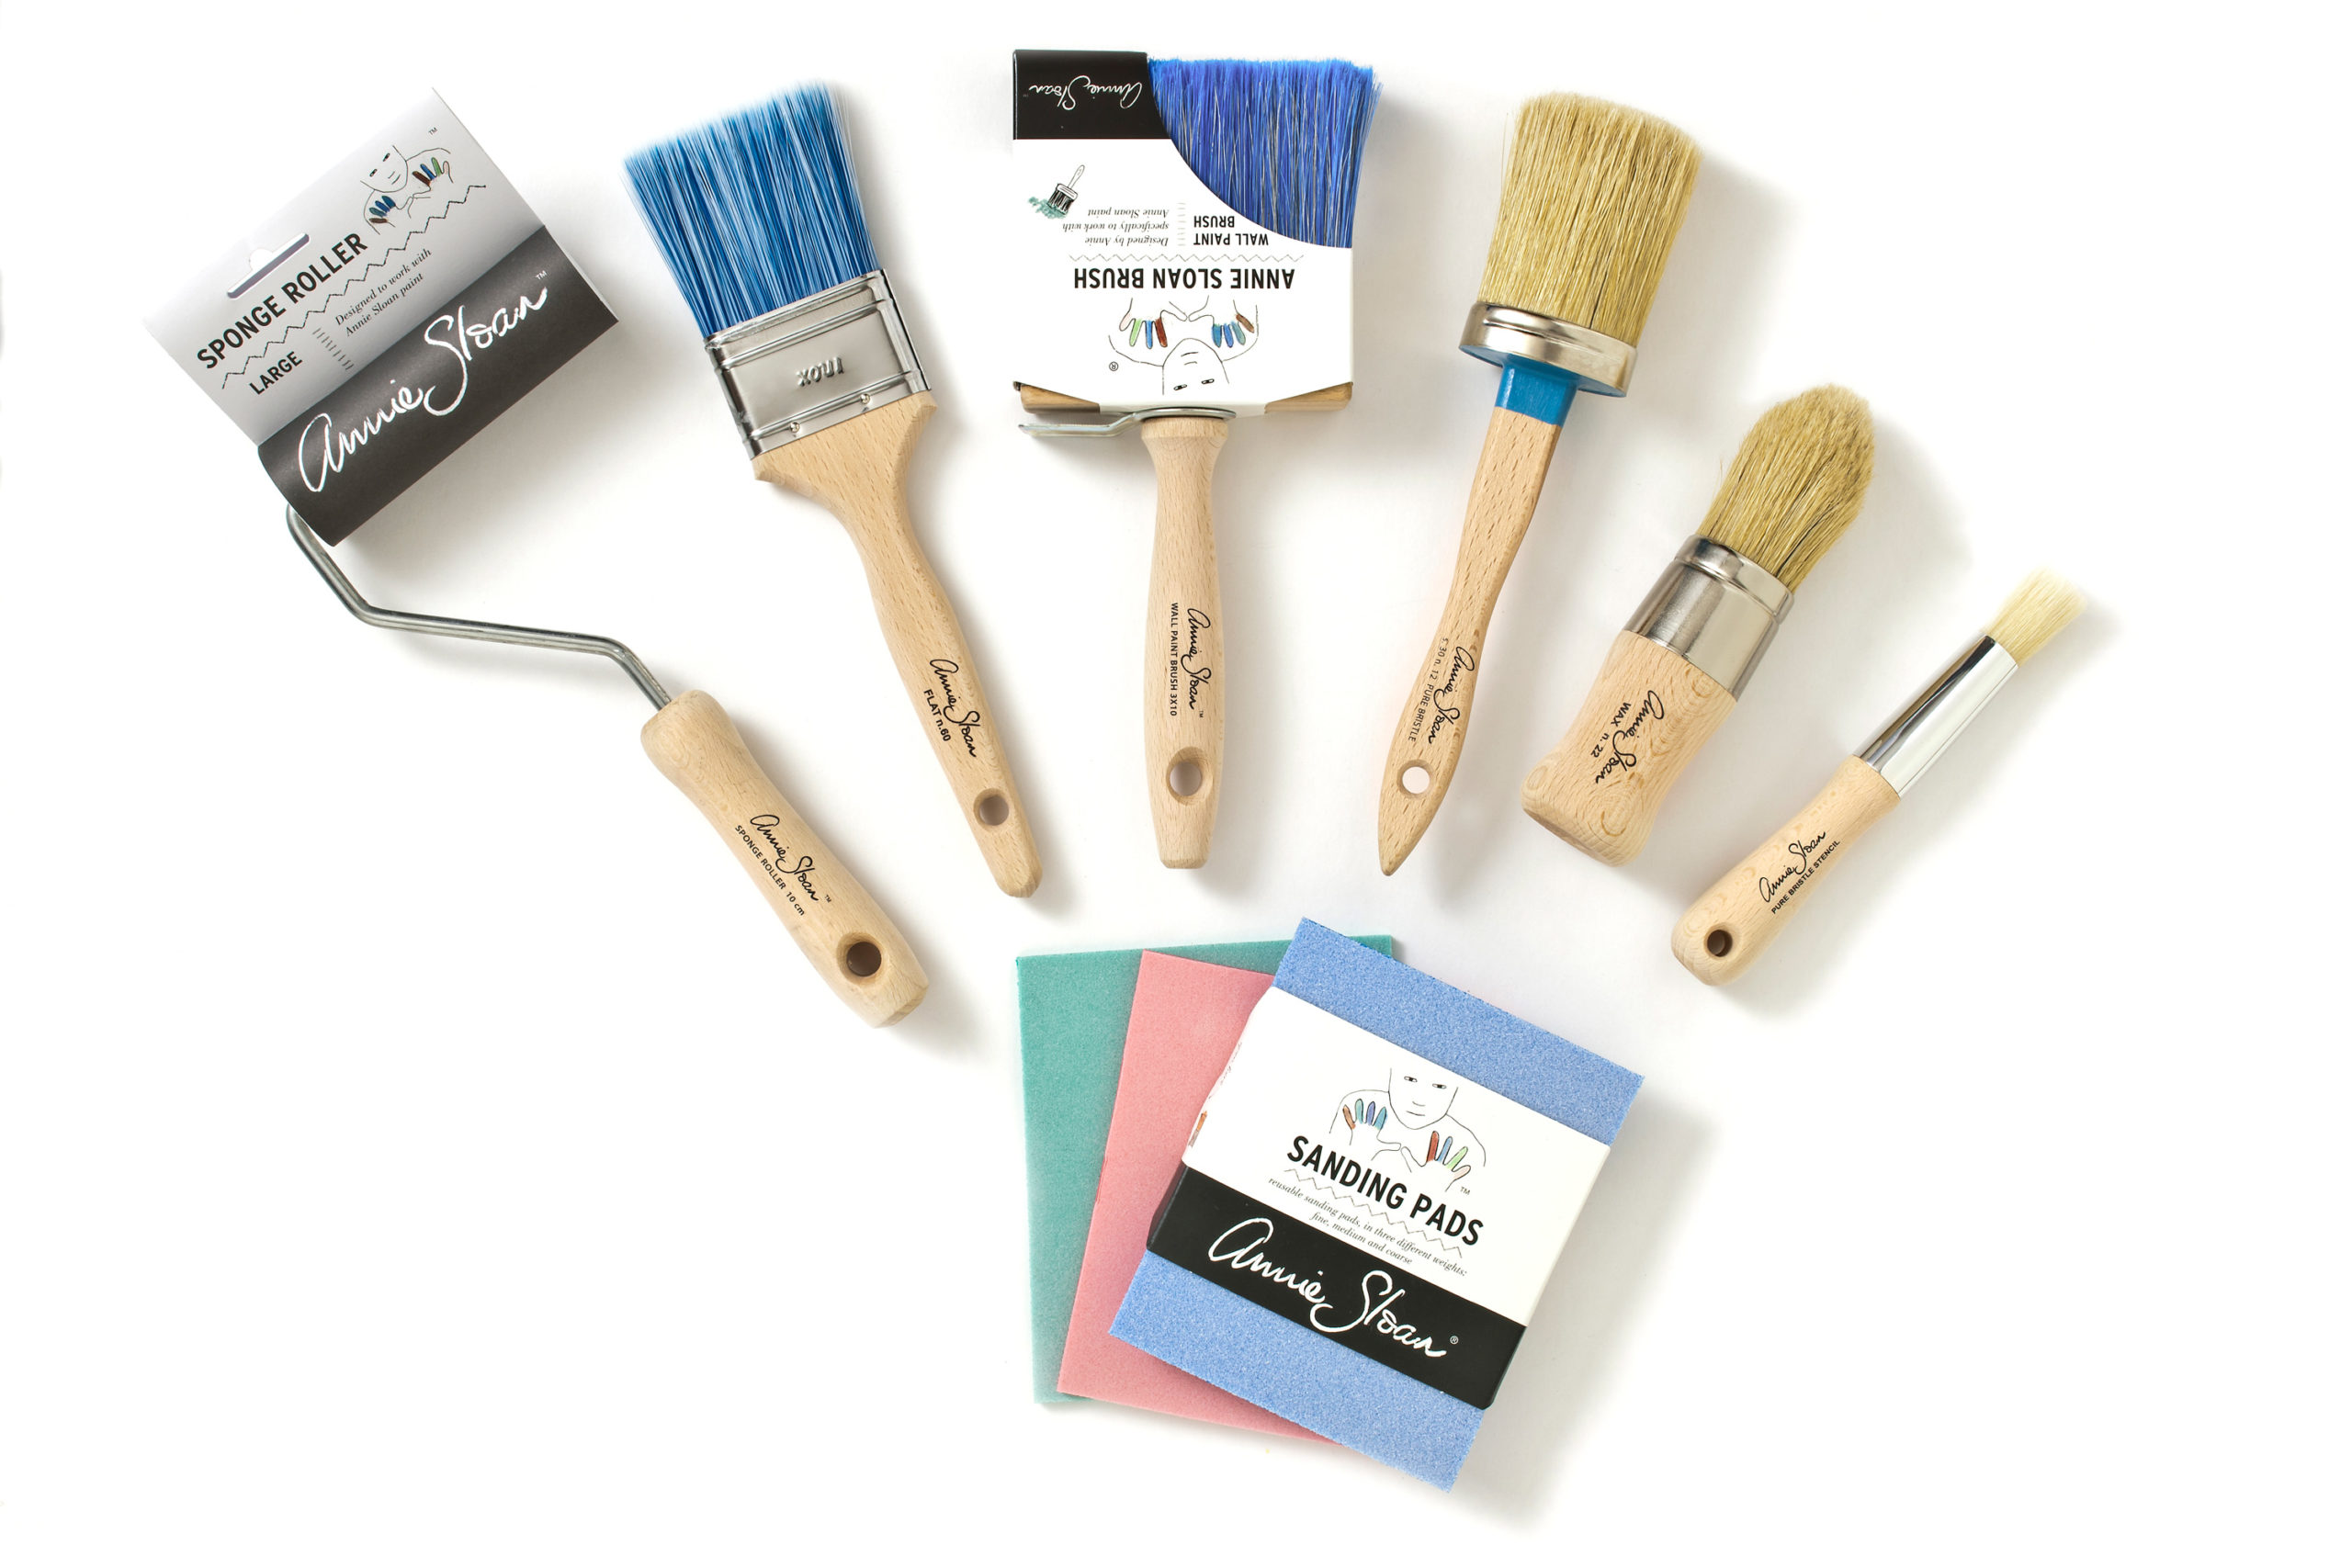 Chalk Wax Paint Brush 5Pcs Set Including 3 Small Paint Brushes for  Furniture Painting and 2 Large Chalk Brushes, Bristle Paint Brushes Set  Compatible with Annie Sloan Chalk Paint, Fusion Mineral Paint